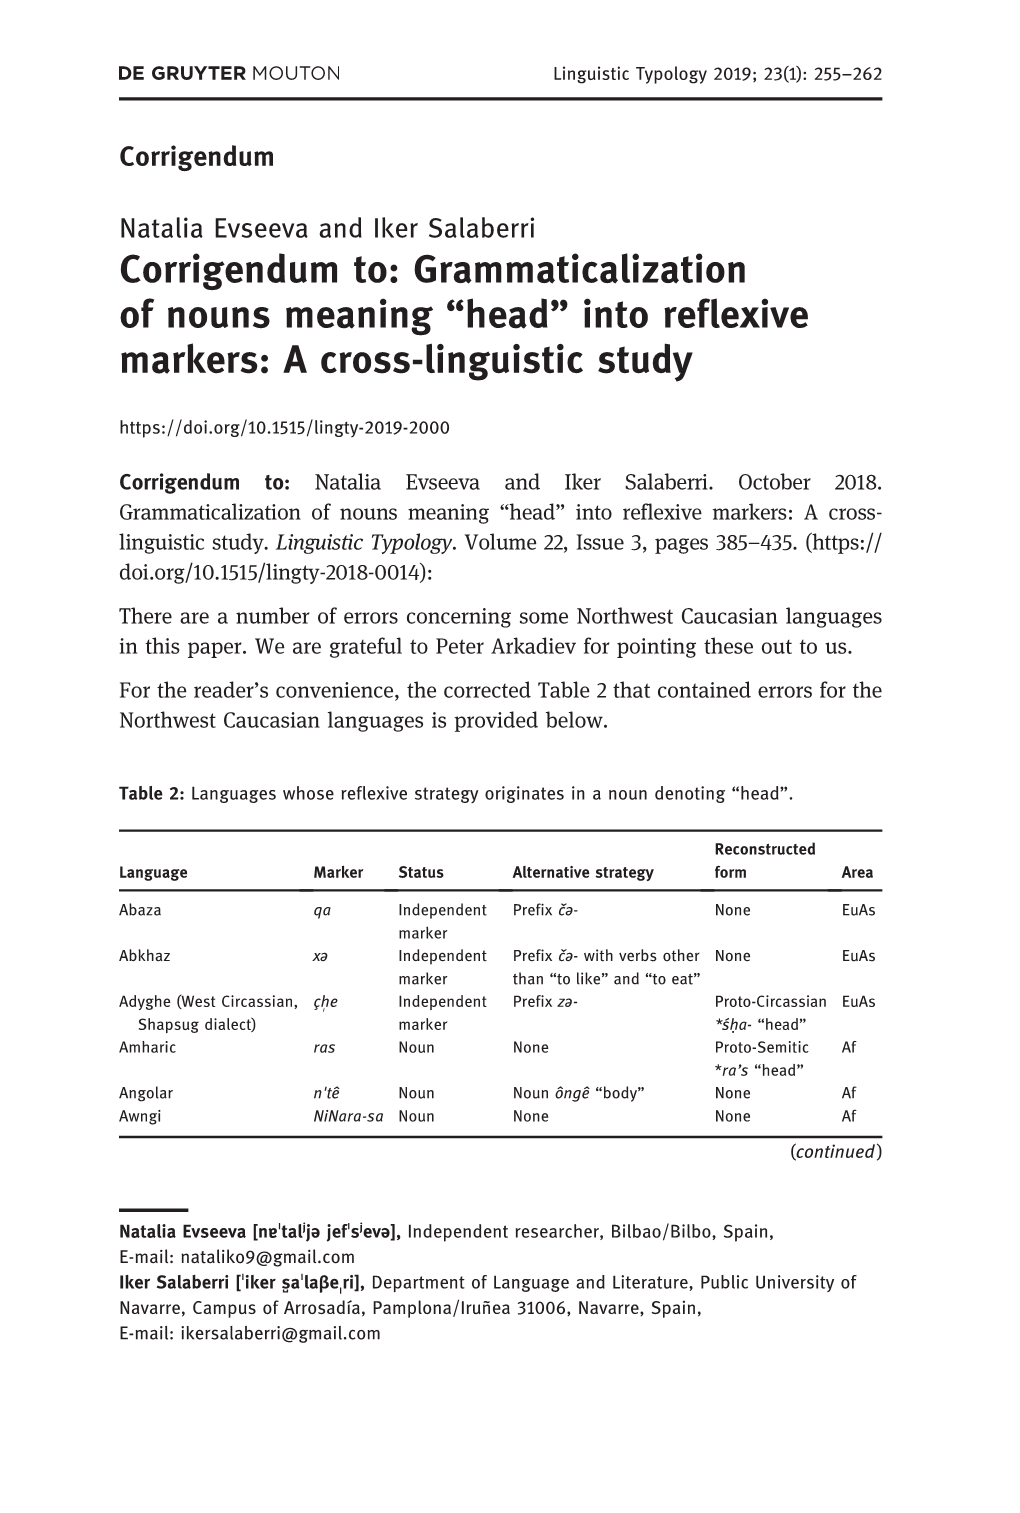 Corrigendum To: Grammaticalization of Nouns Meaning “Head” Into Reflexive Markers: a Cross-Linguistic Study